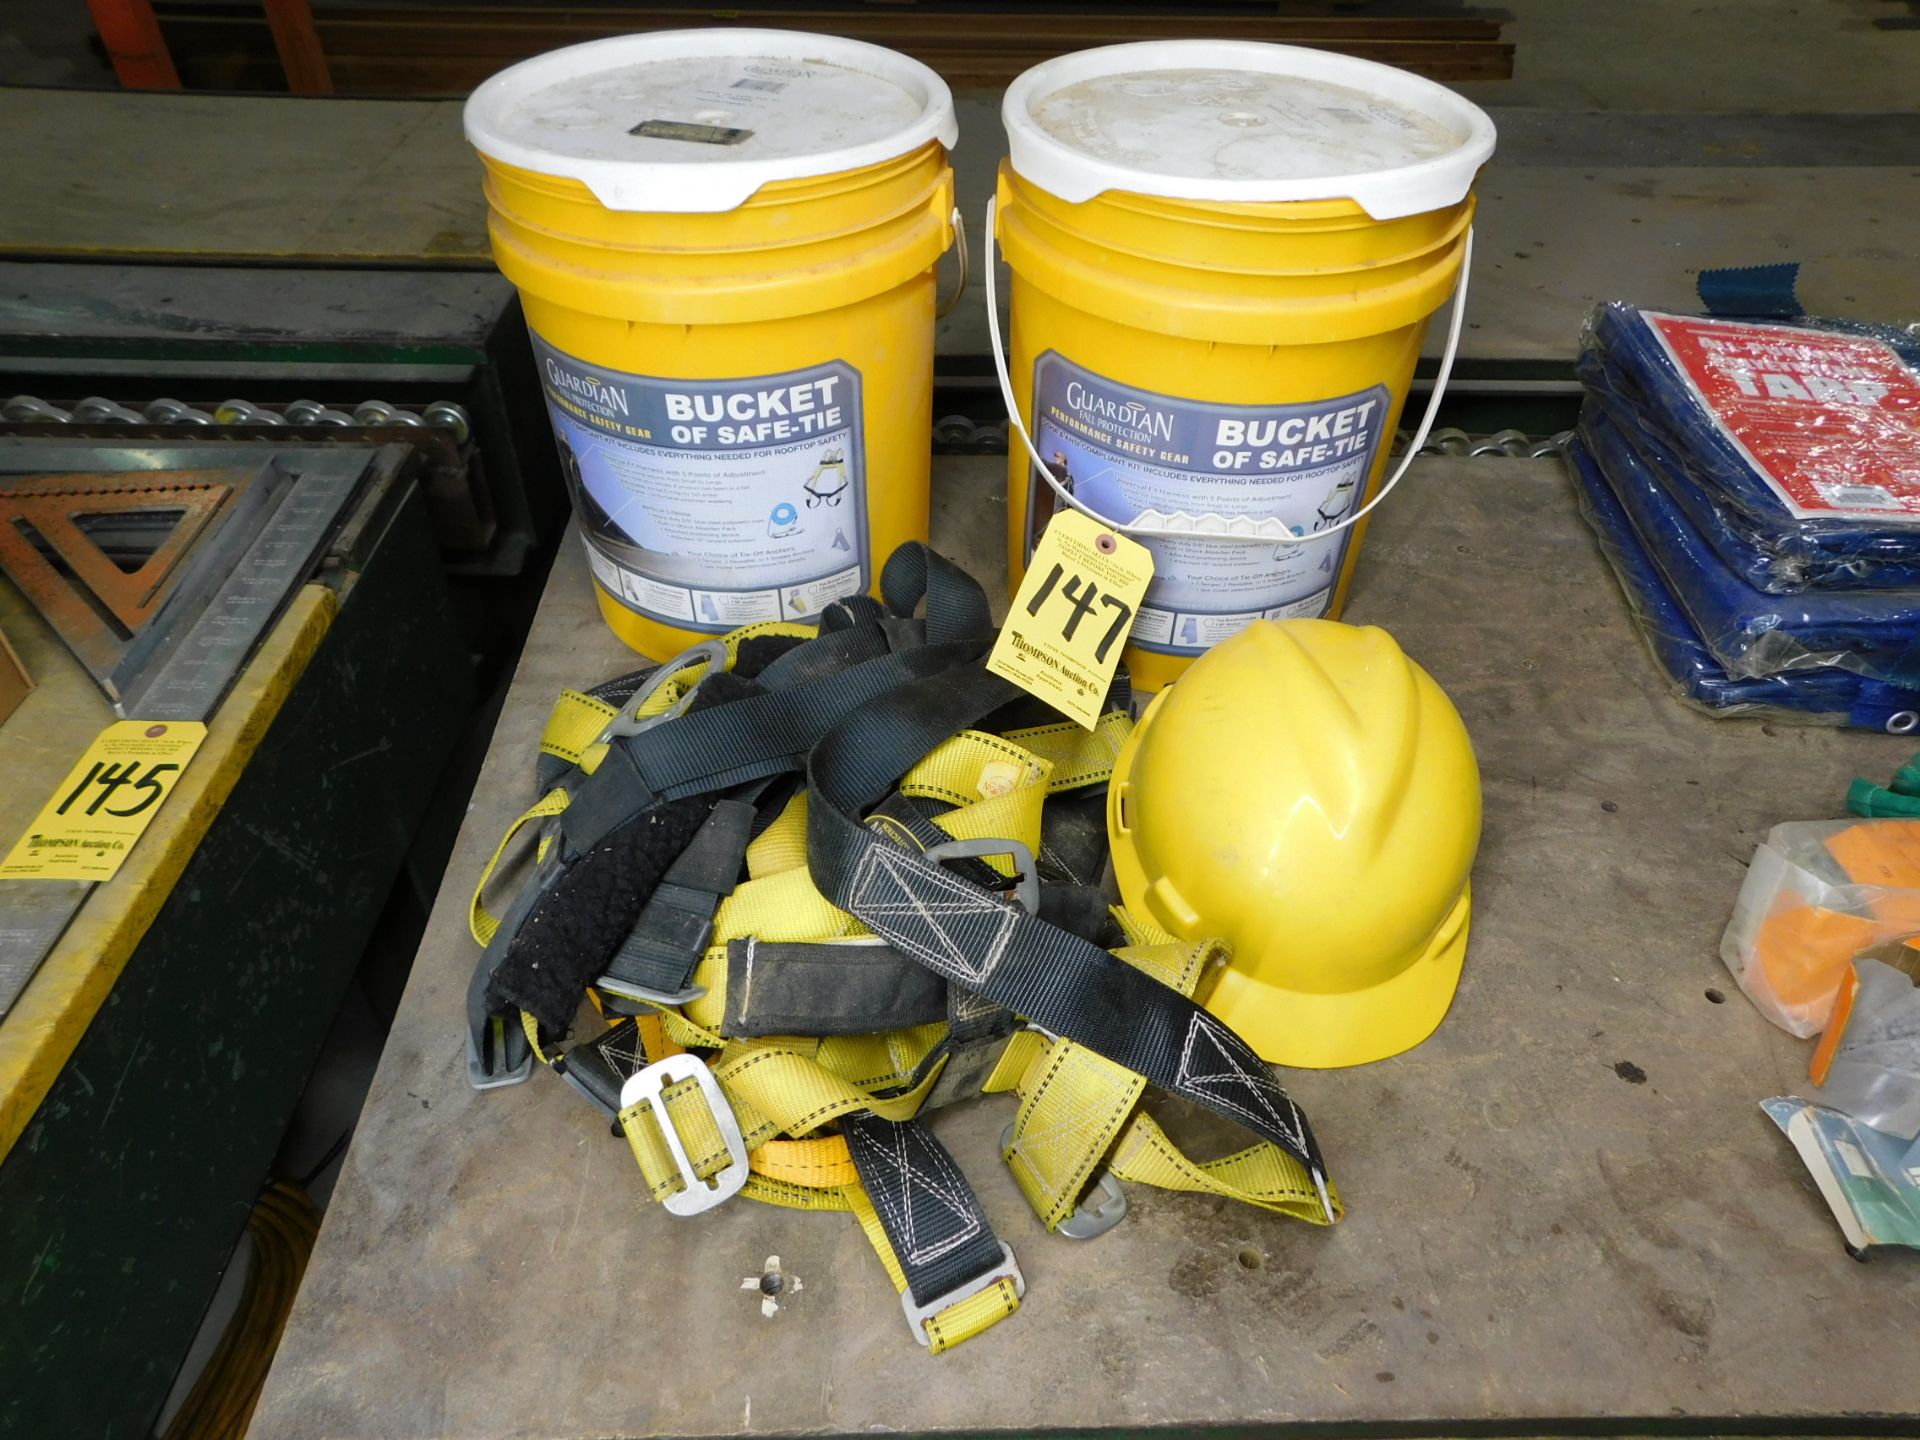 (2) Guardian Bucket of Safe-Tie Fall Protection Gear, Safety Harnesses, and Hard Hat